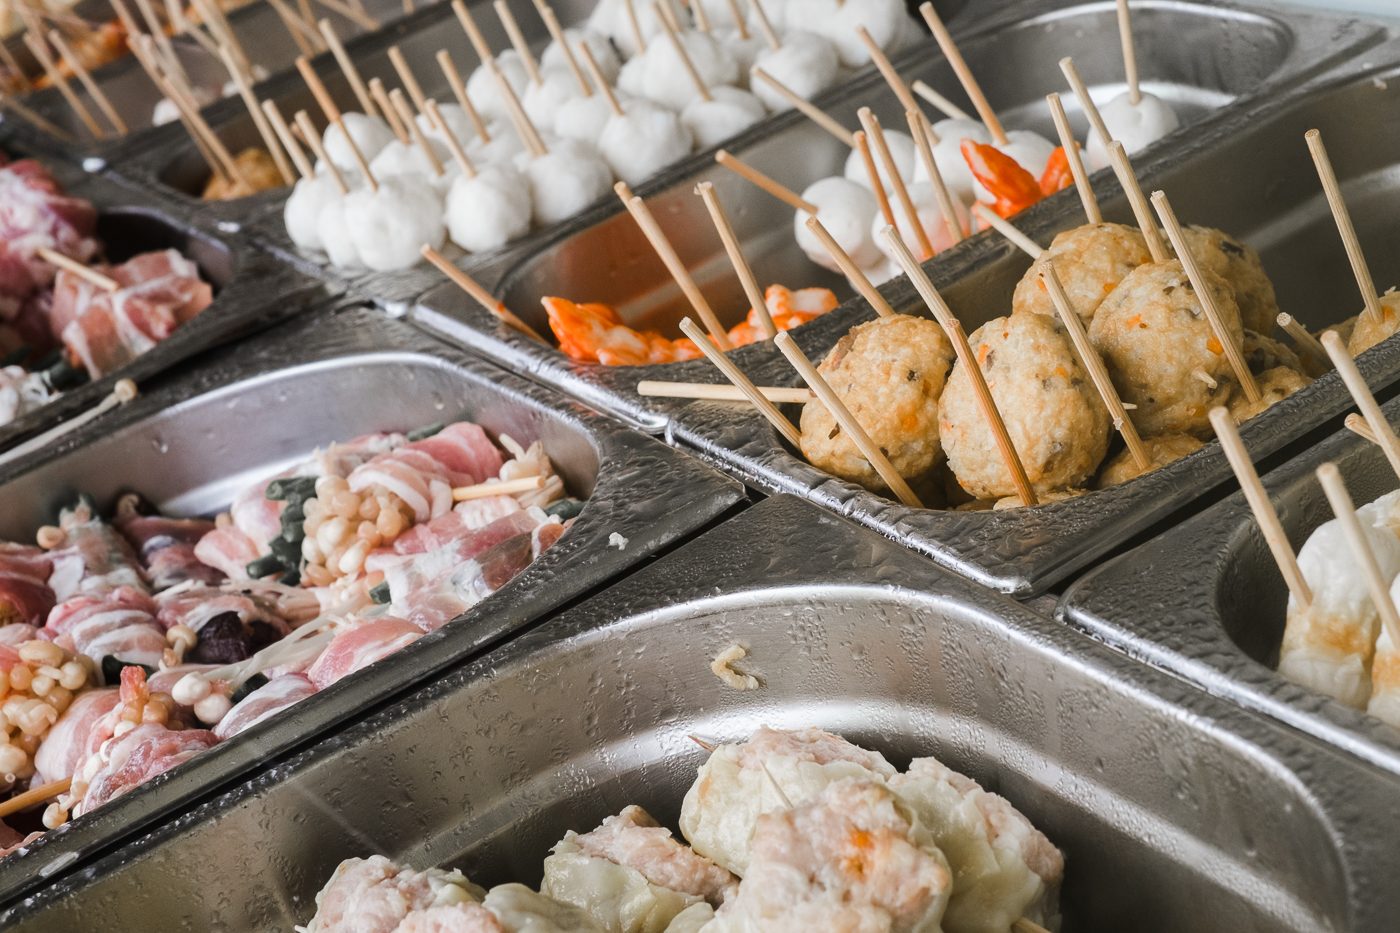 Customers of HK Eat Fresh can choose from a variety of street food which is fried to order. 